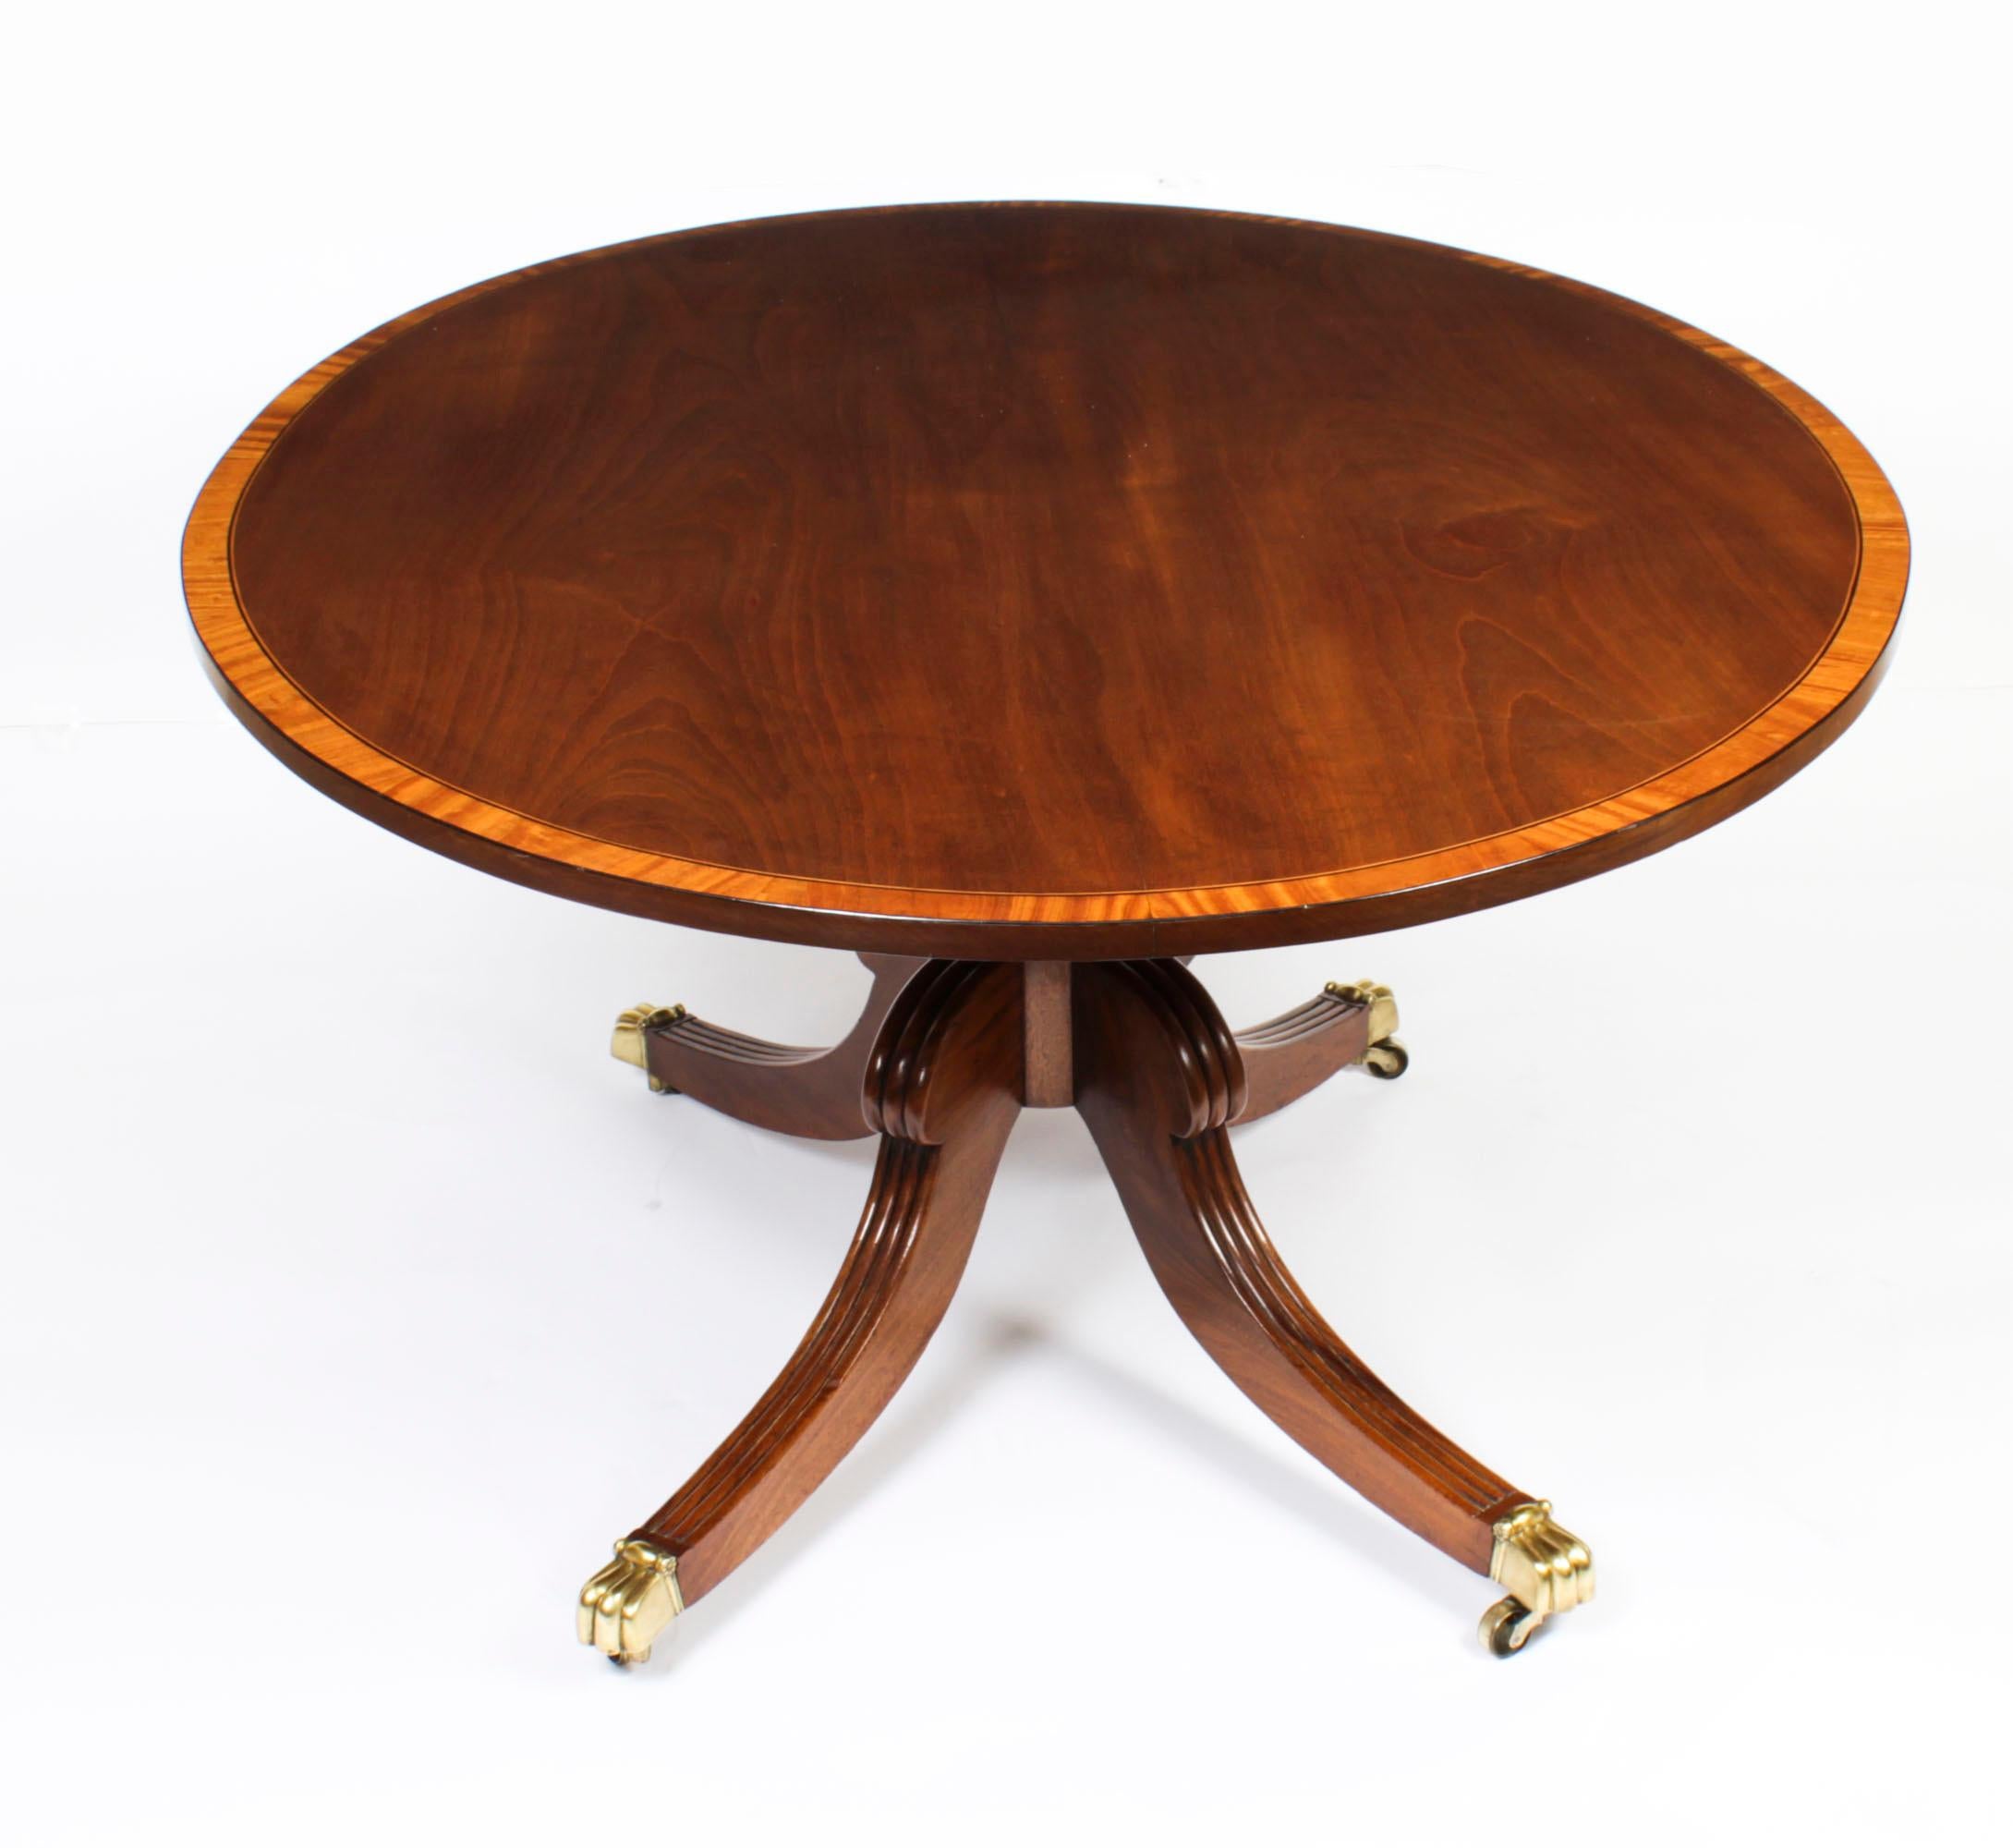 Antique Oval Regency Flame Mahogany Dining Table 19th C For Sale 2